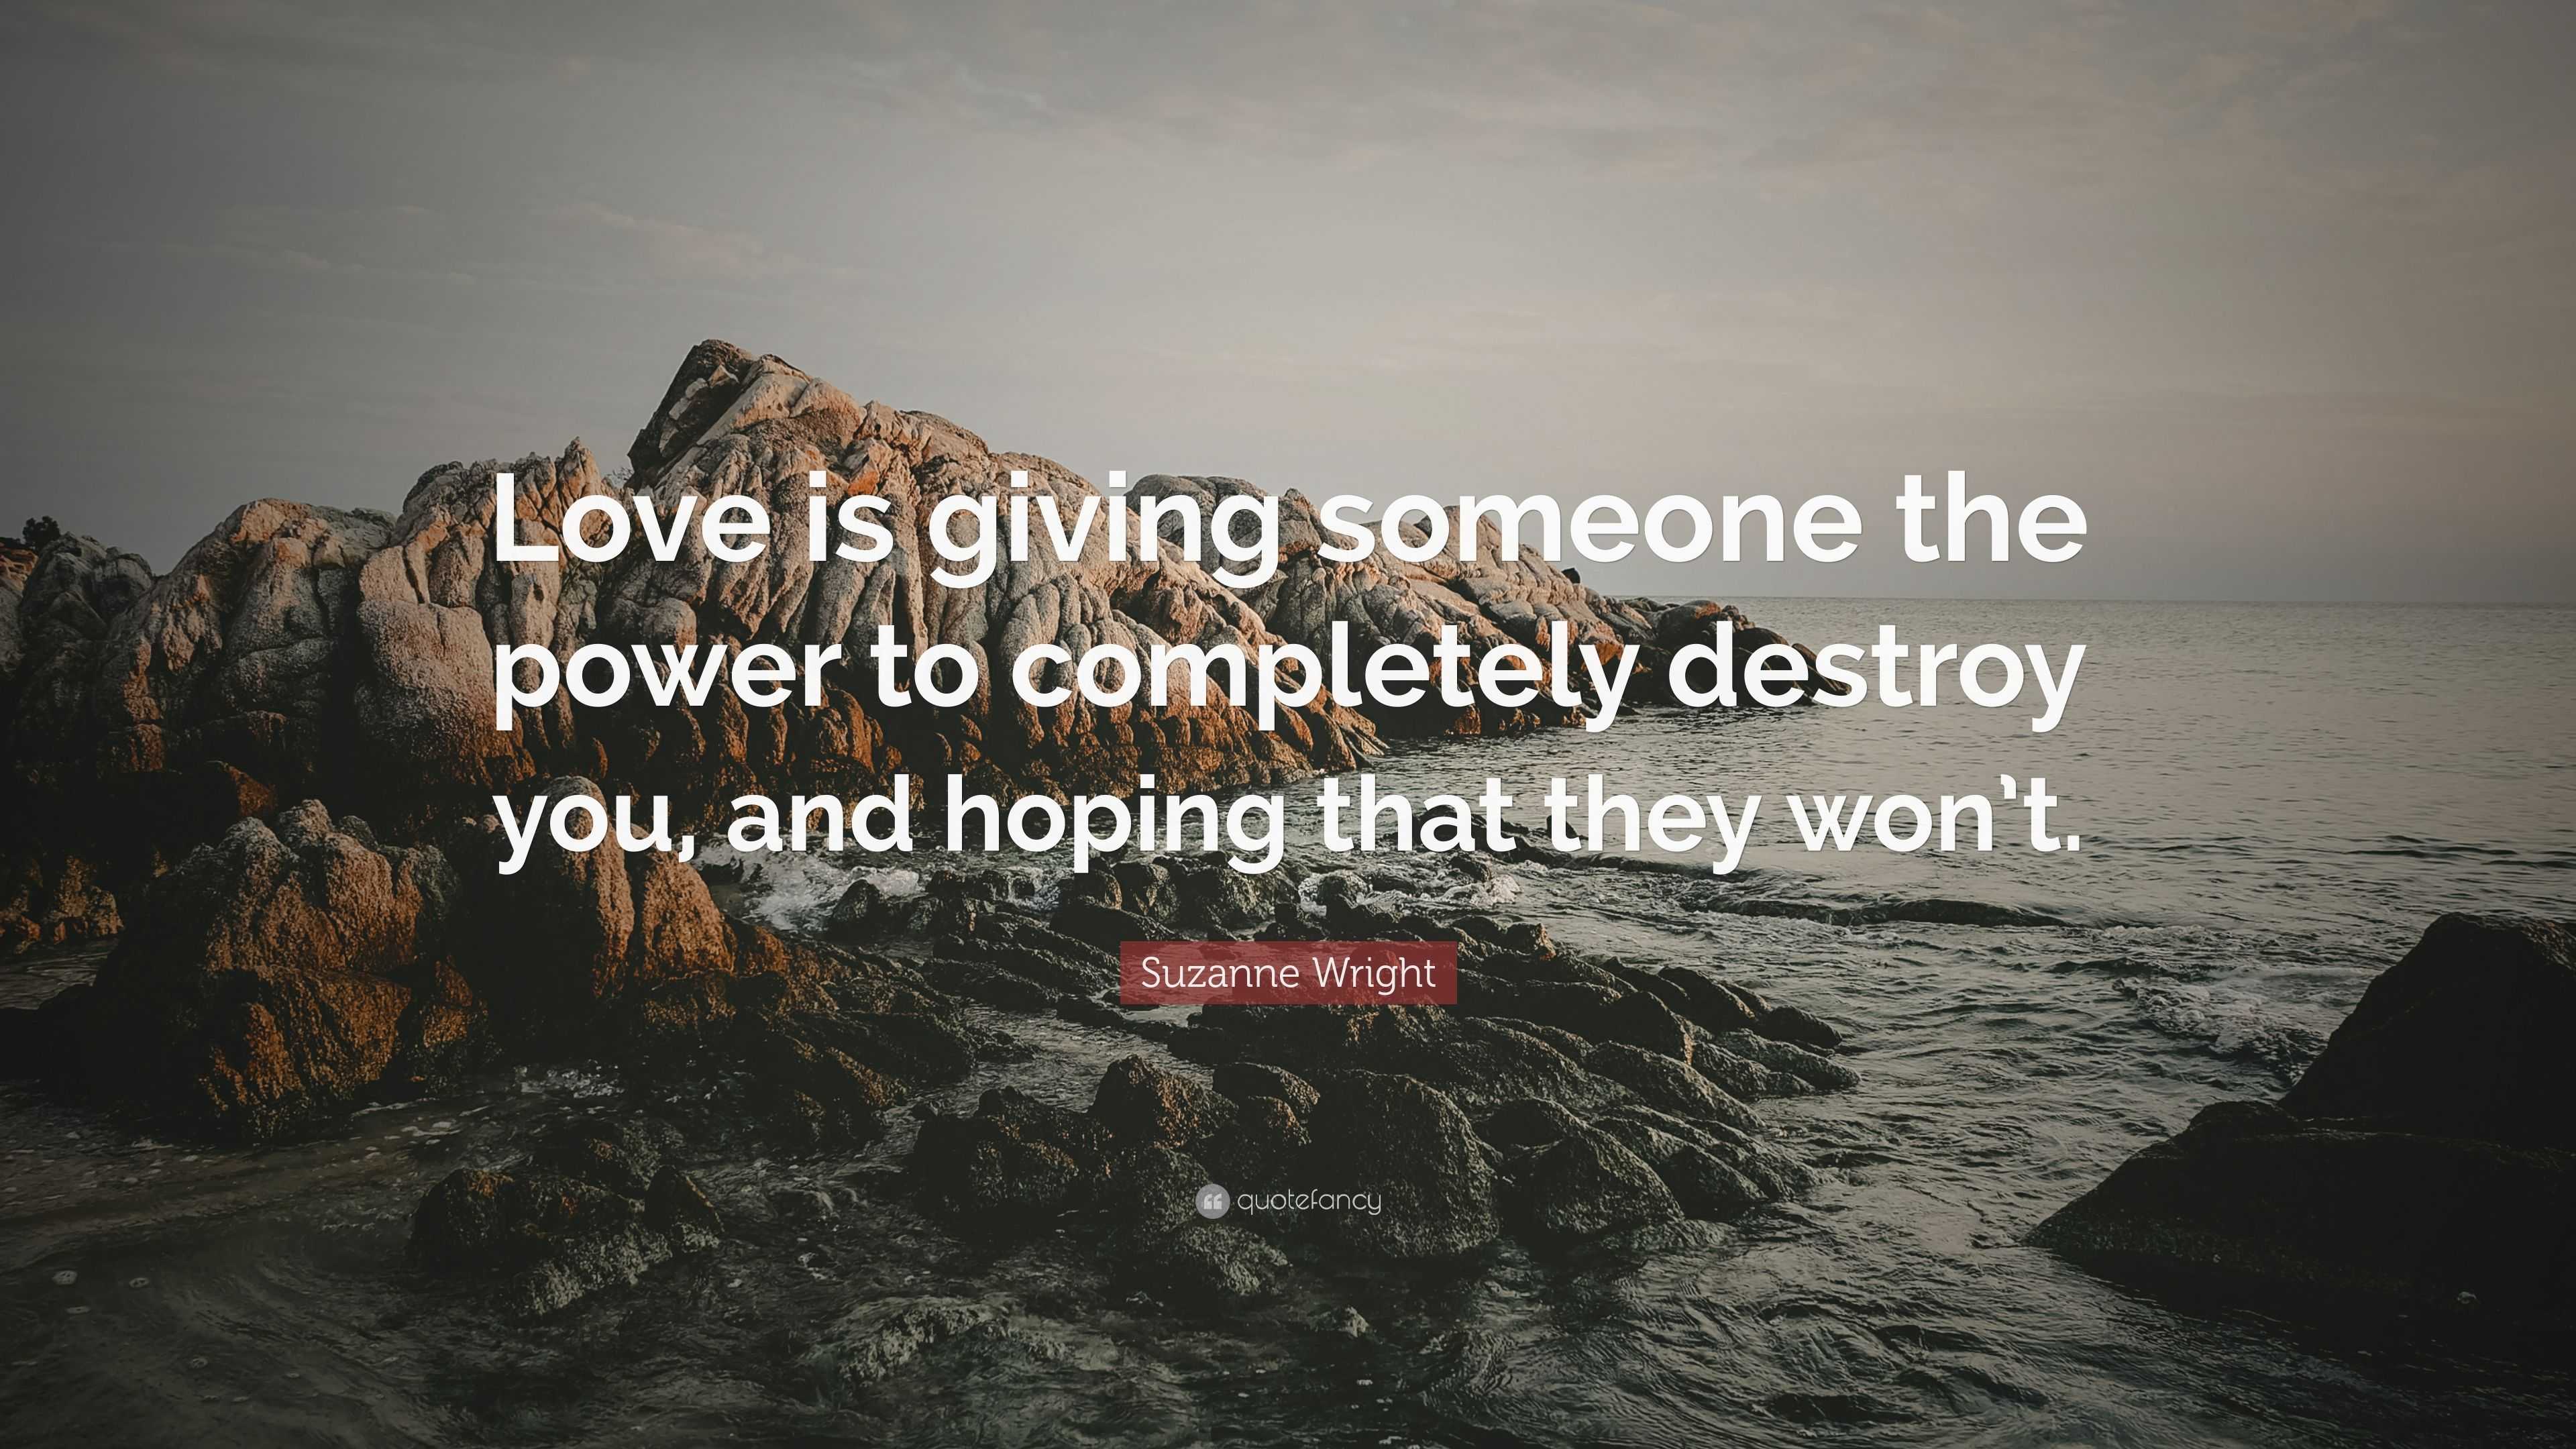 Suzanne Wright Quote: "Love is giving someone the power to completely destroy you, and hoping ...